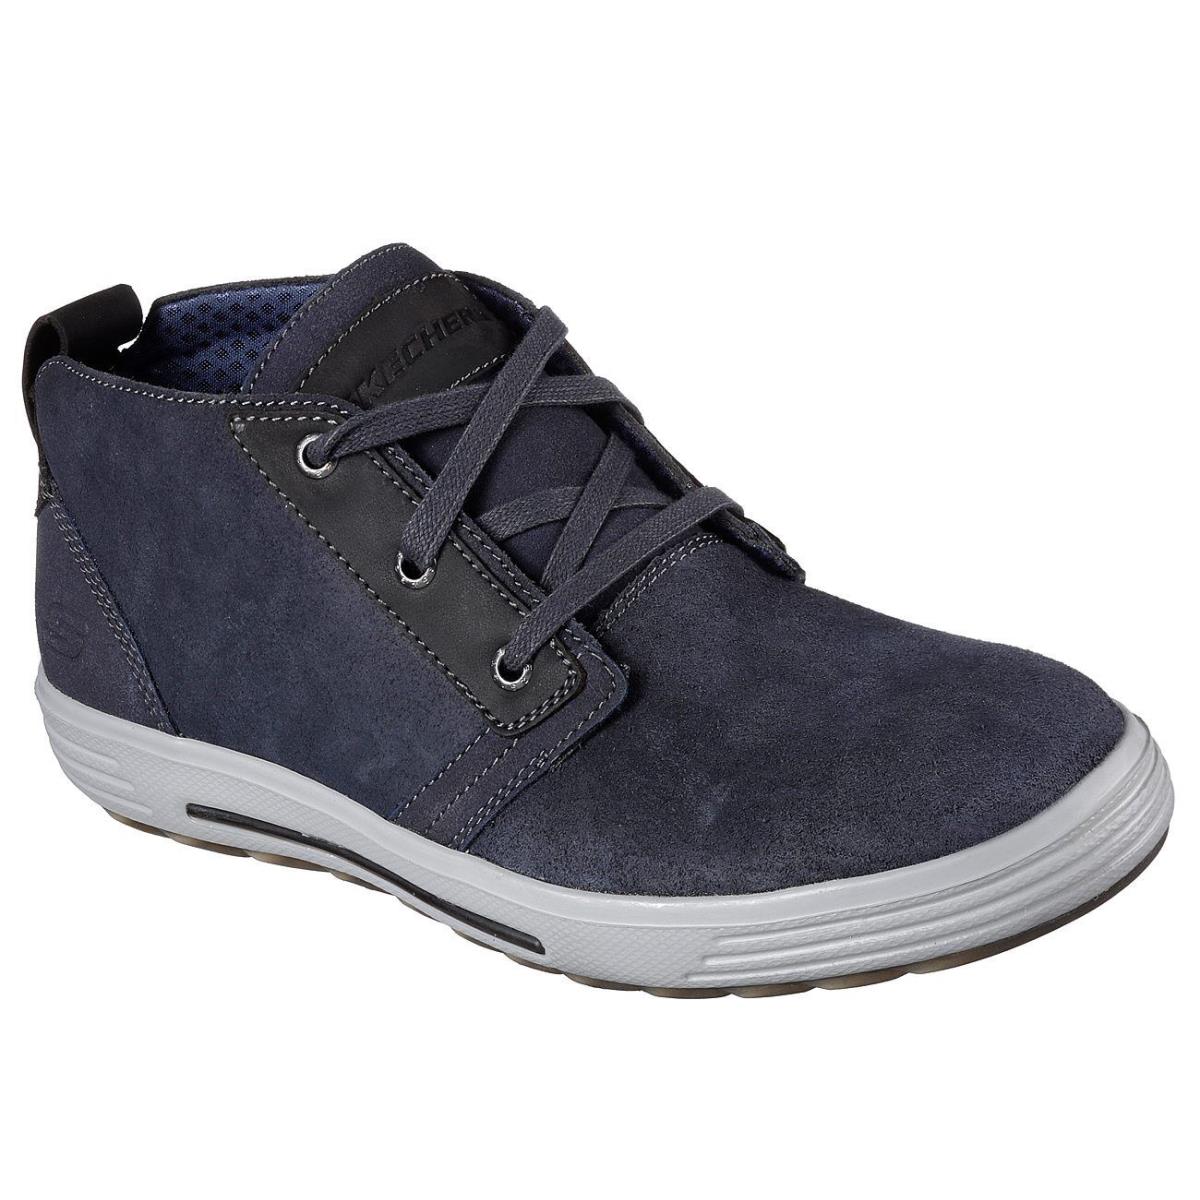 Men`s Skechers Porter - Malego Mid Top Oxford Shoes 65144 /nvy Sizes 8-14 Navy